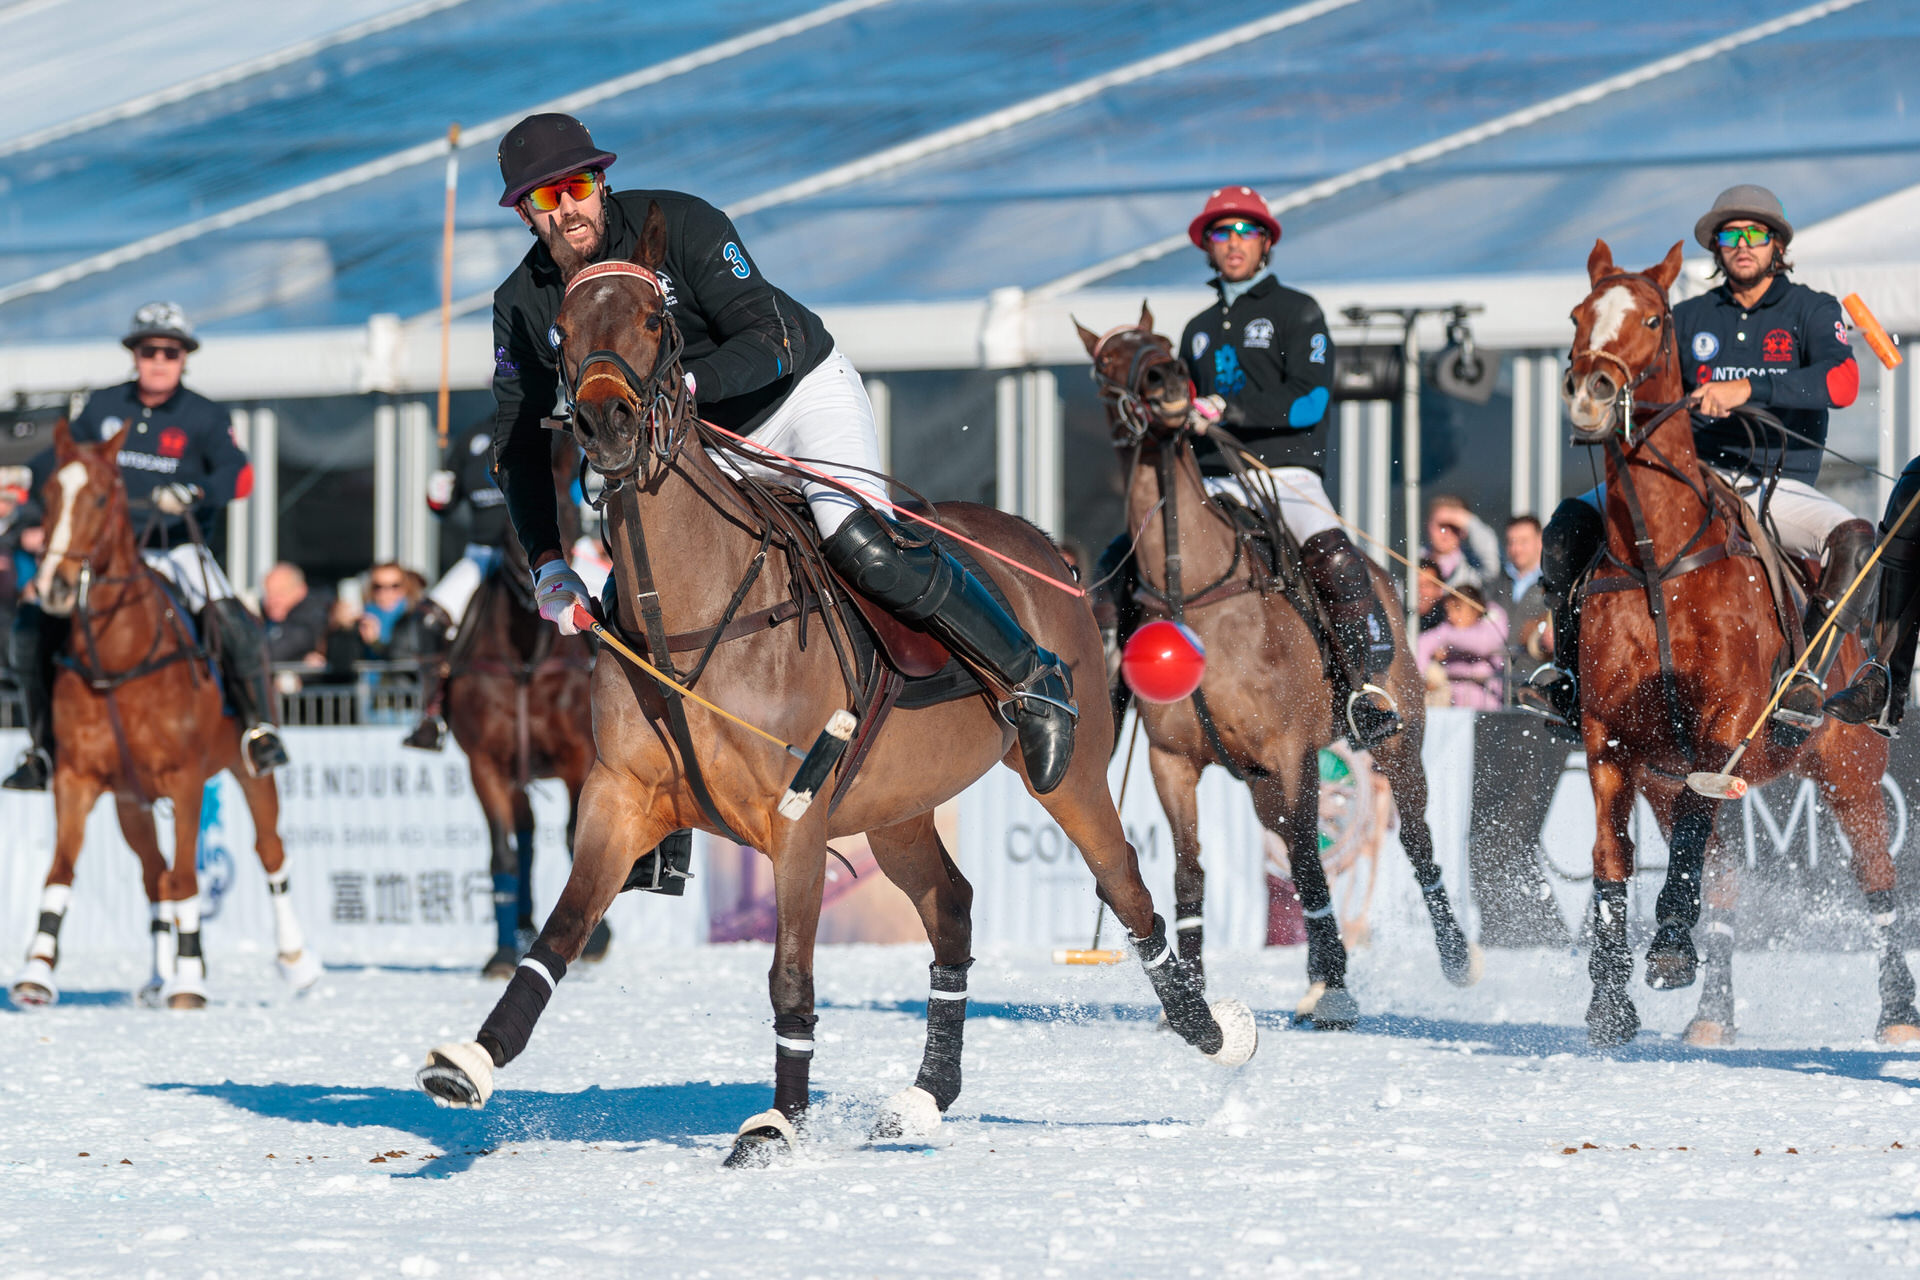 Pictures of the 18. Bendura Bank Snow Polo World Cup at Reith bei Kitzbühel 2020 by Reinhardt & Sommer for Lifestyle Events